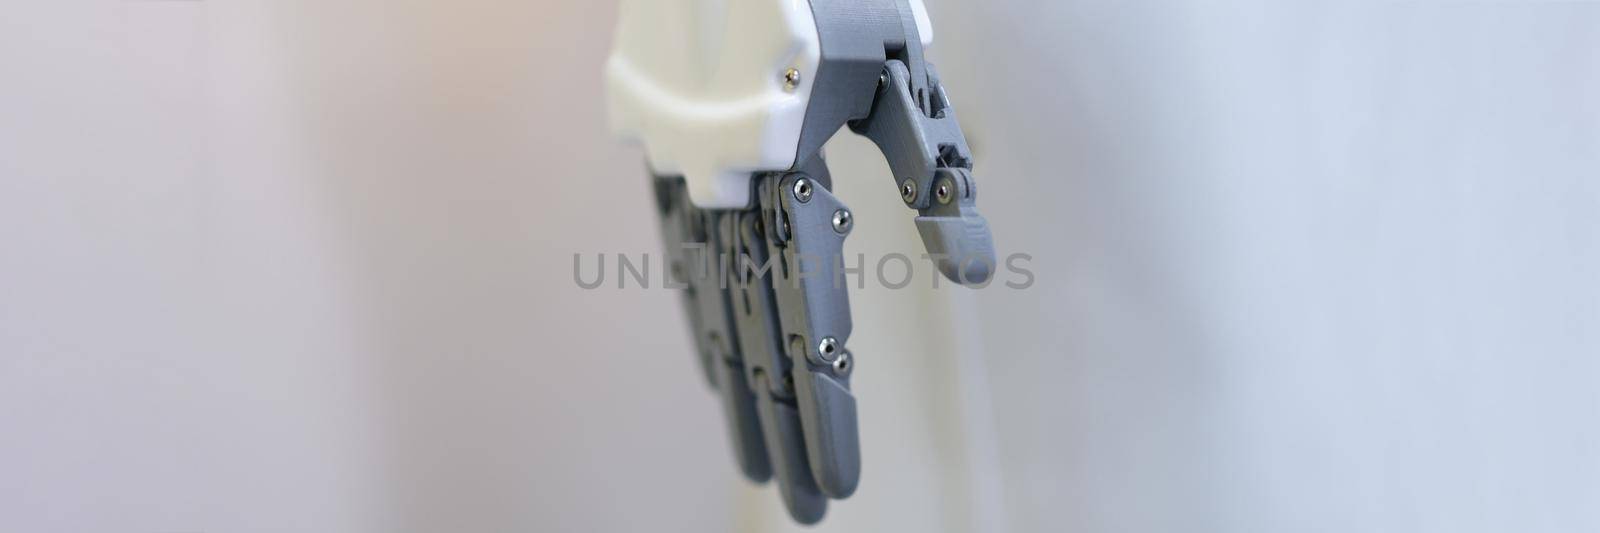 Robotic hand with fingers on a white background by kuprevich